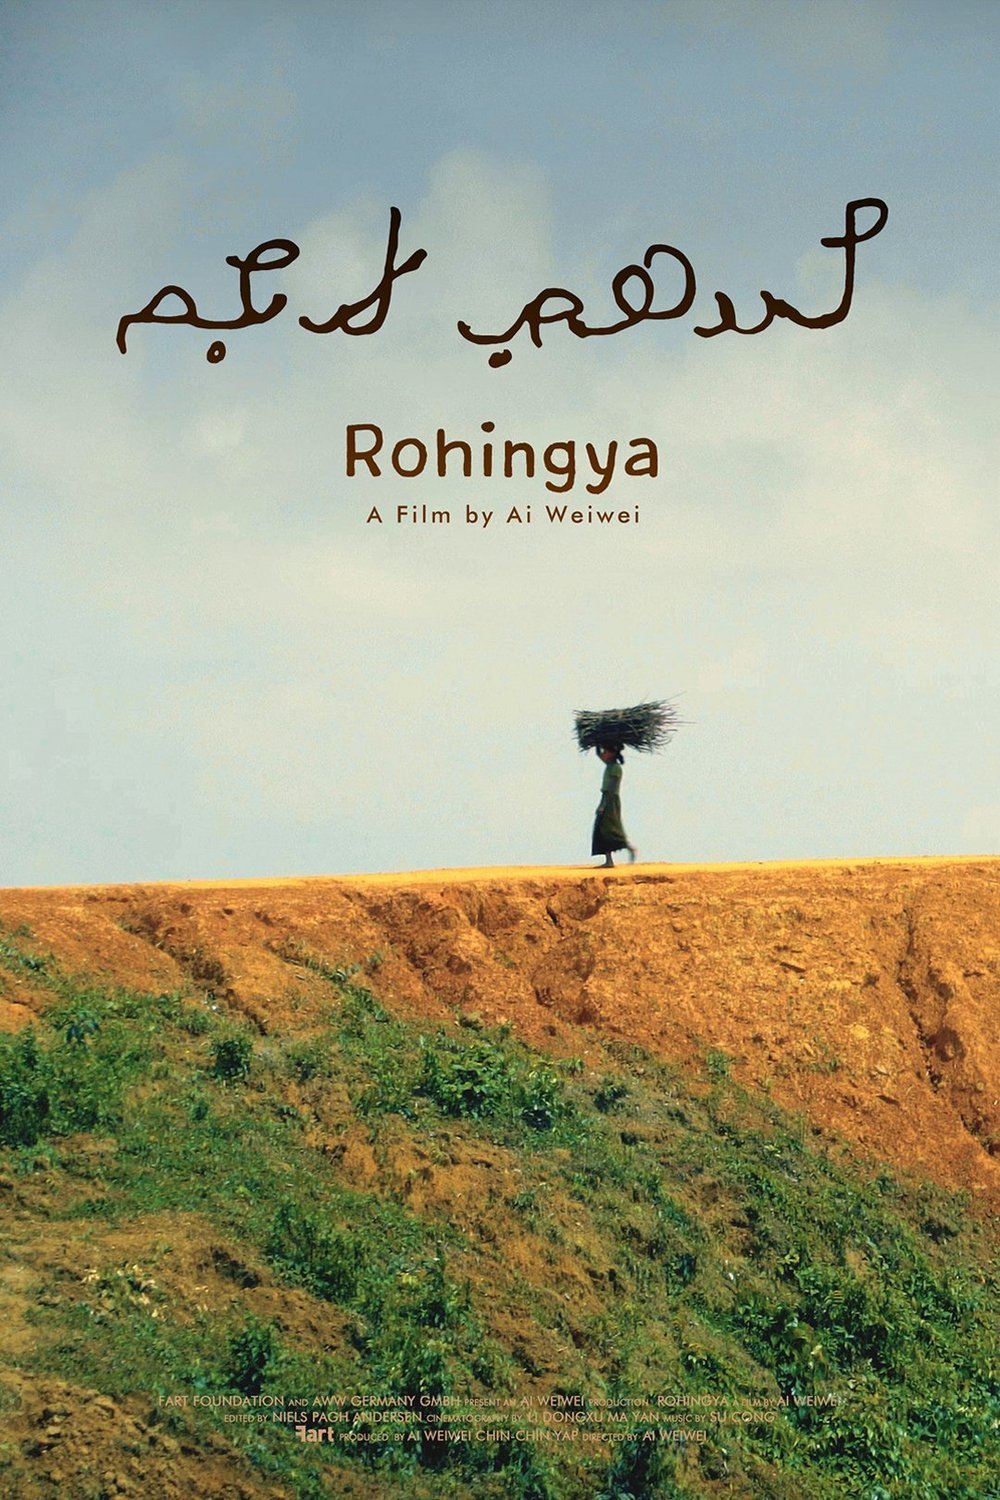 No dialogue poster of the movie Rohingya